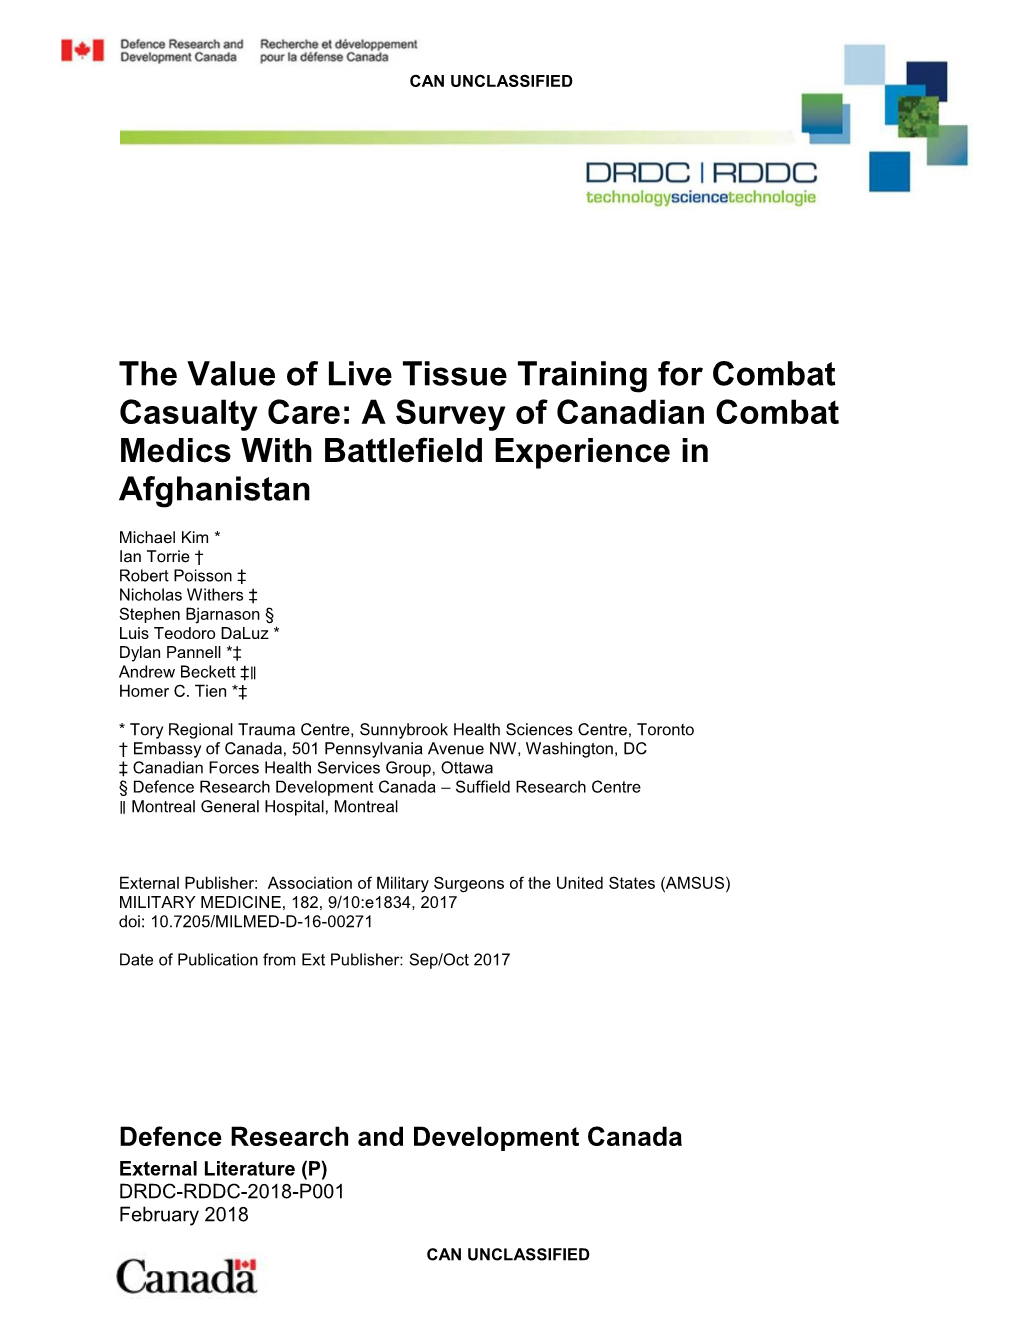 The Value of Live Tissue Training for Combat Casualty Care: a Survey of Canadian Combat Medics with Battlefield Experience in Afghanistan